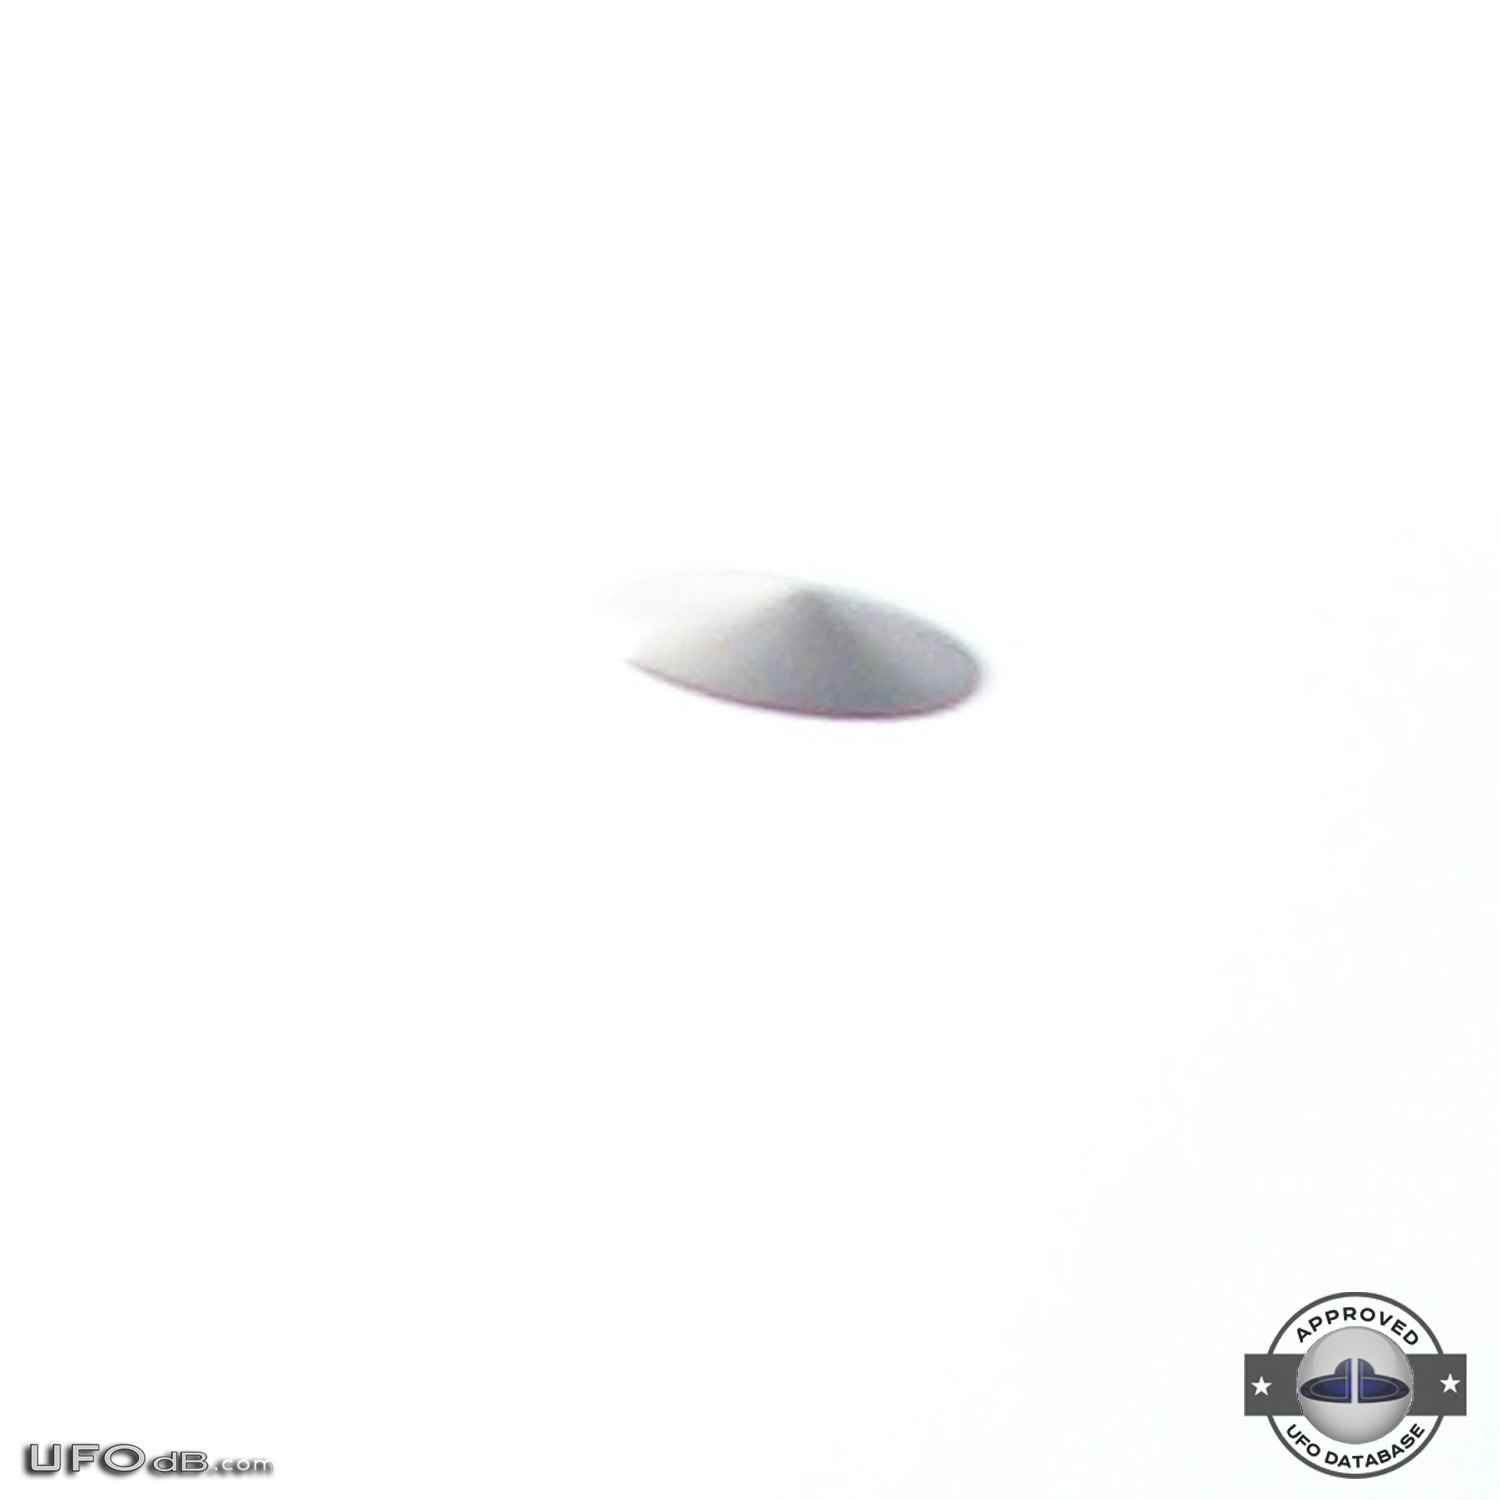 Silver saucer UFO caught on picture in Bristol, England UK - 2010 UFO Picture #412-2